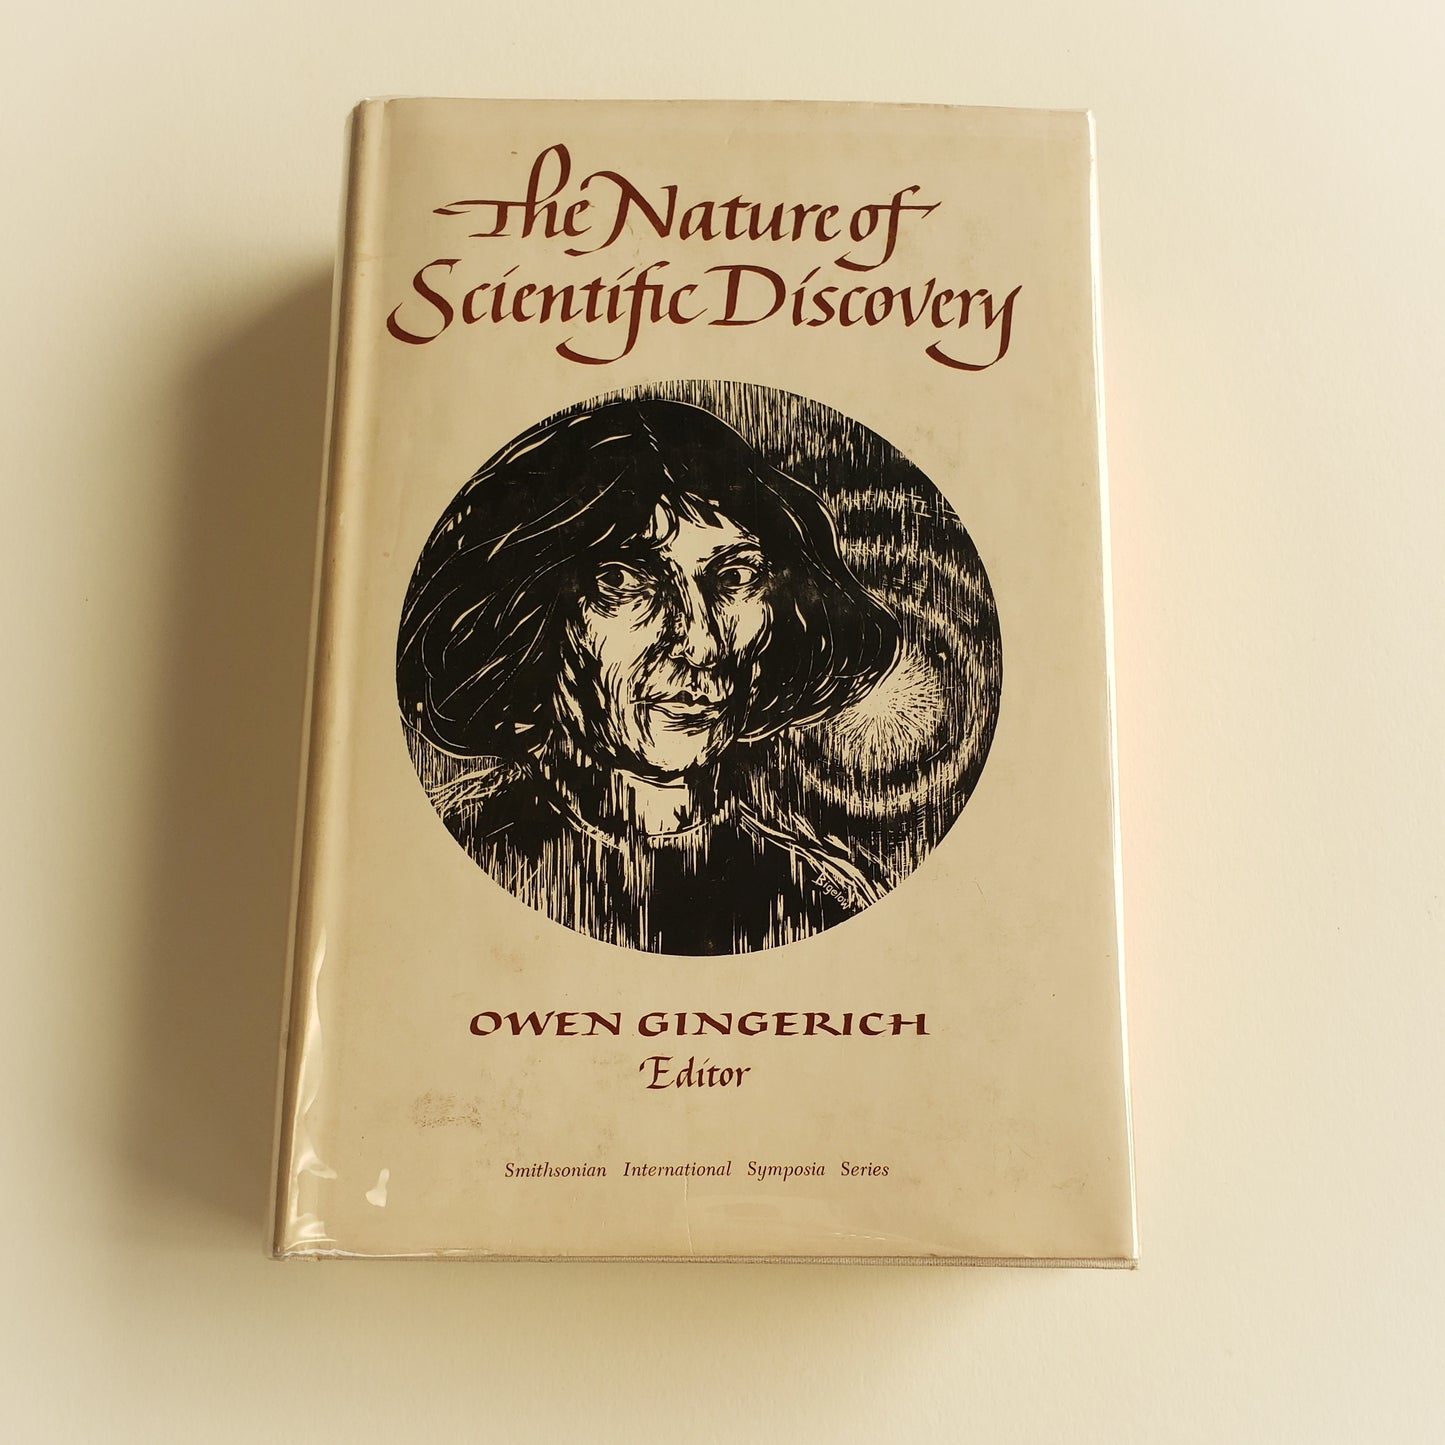 Vintage Book- The Nature of Scientific Discovery, Edited by Owen Gingerich (Science)